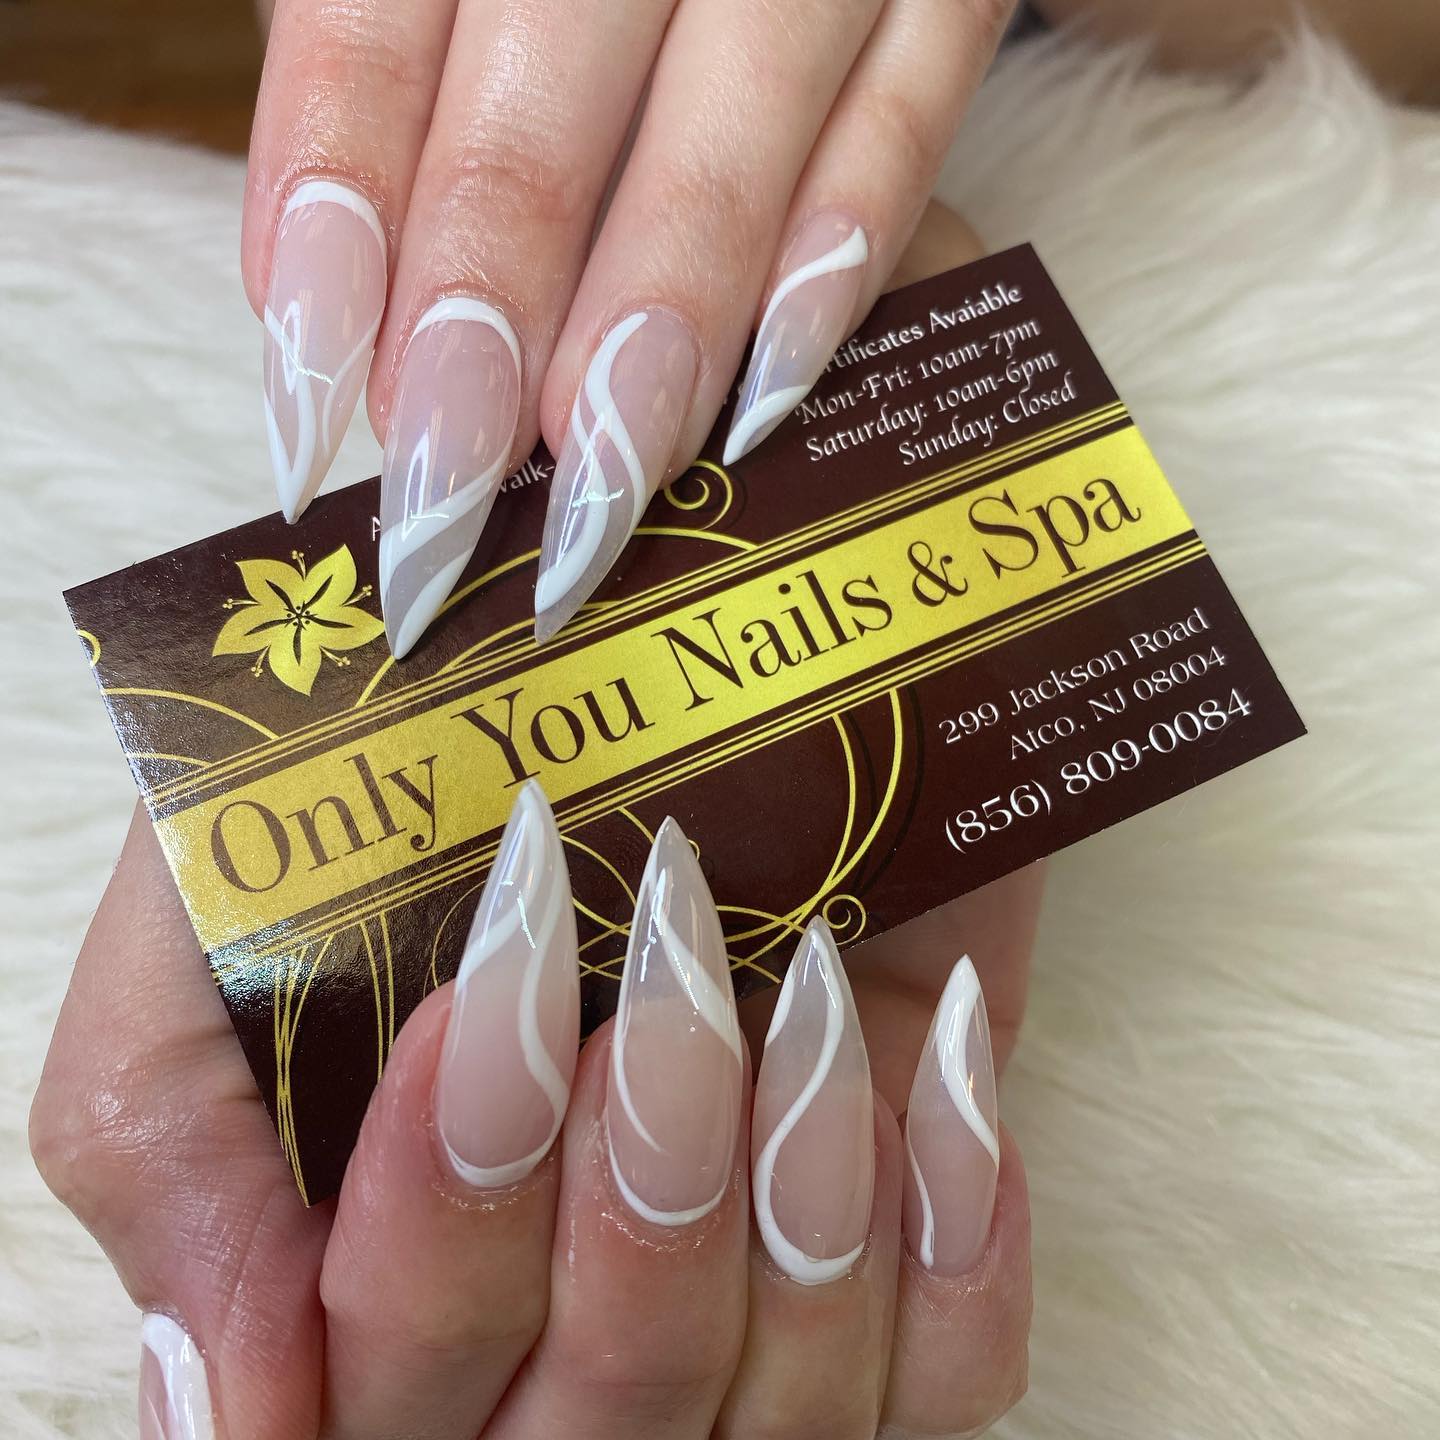 Only You Nail and Spa